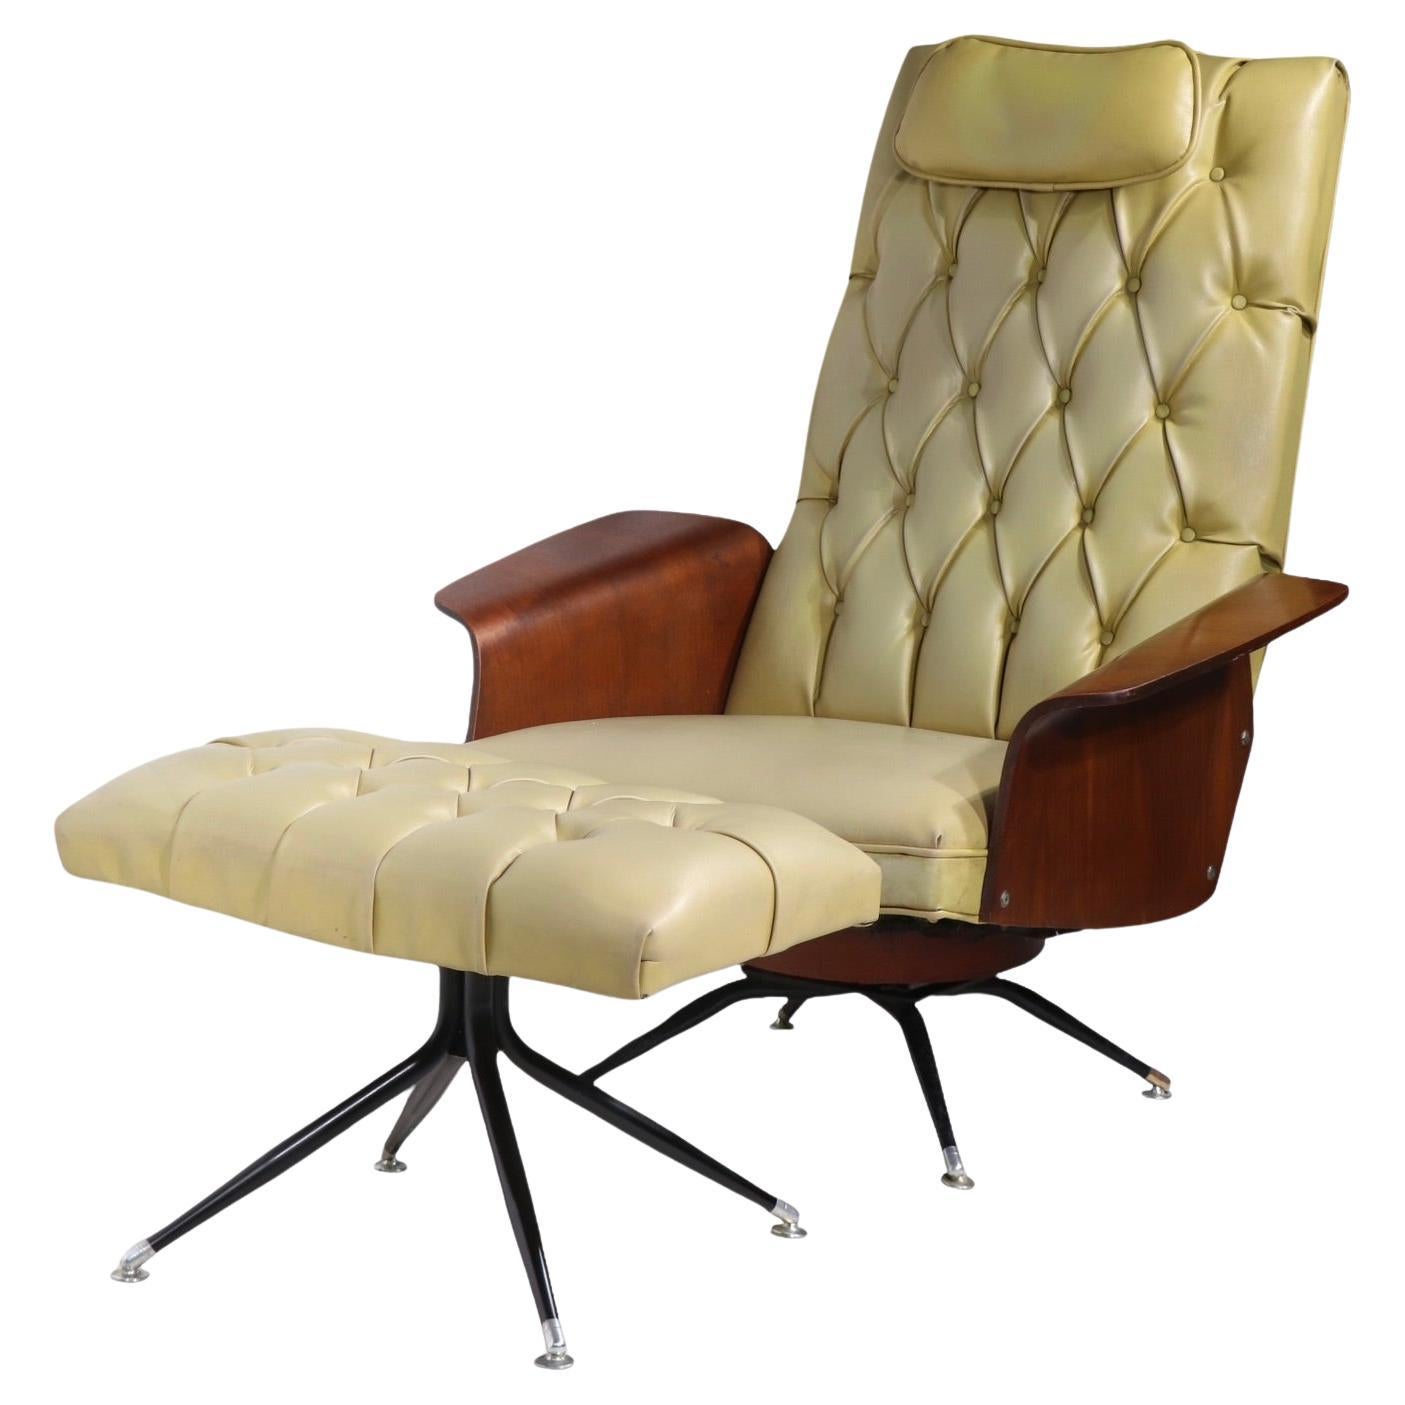 Is an Eames chair worth it?